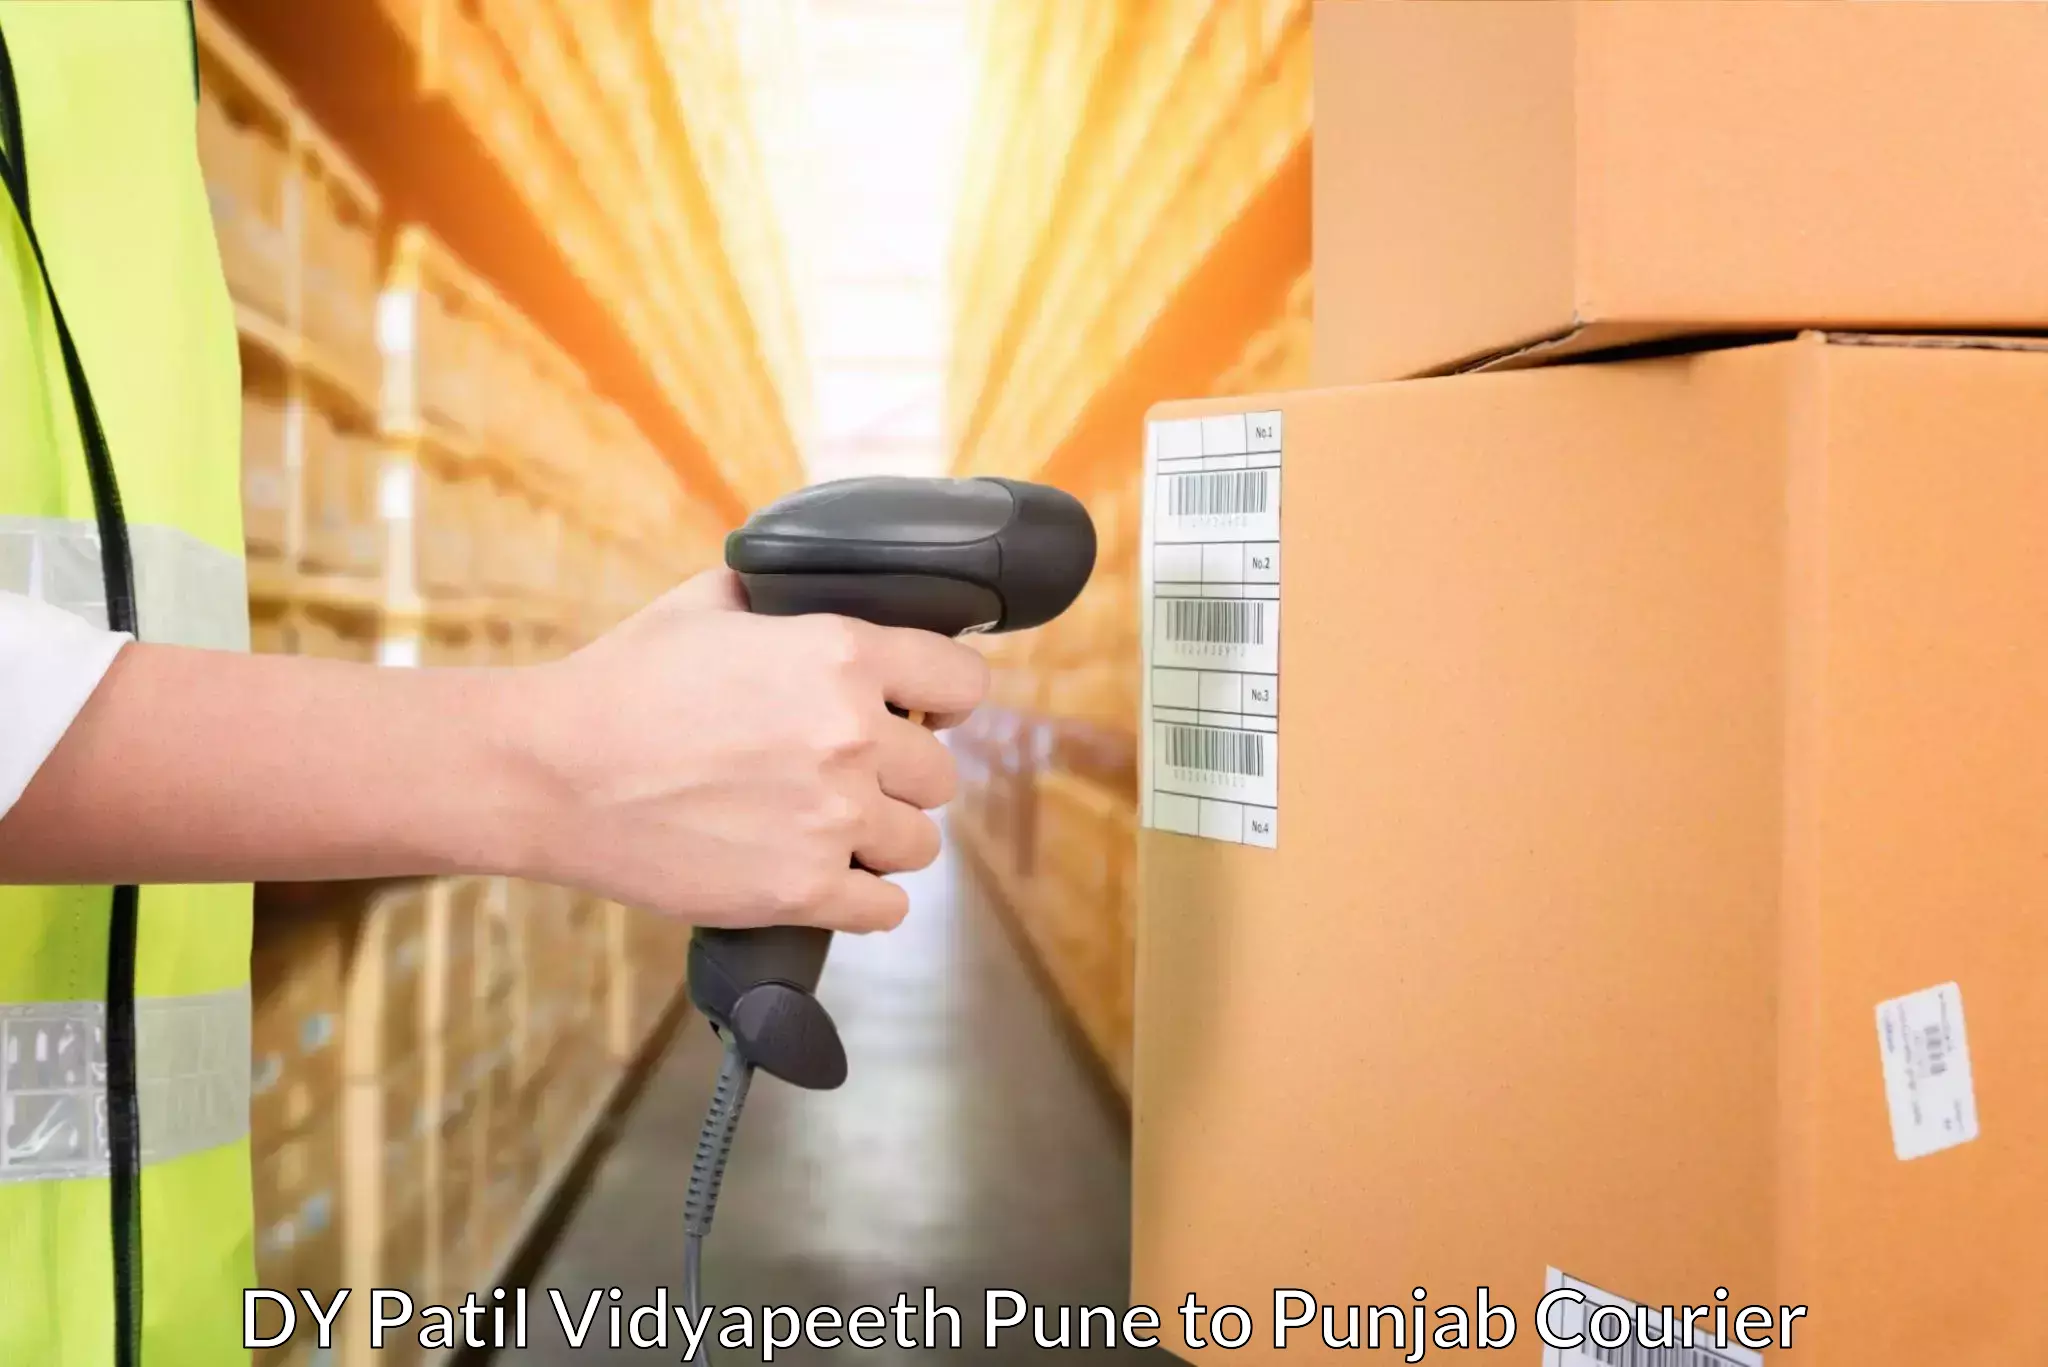 Small parcel delivery in DY Patil Vidyapeeth Pune to Adampur Jalandhar